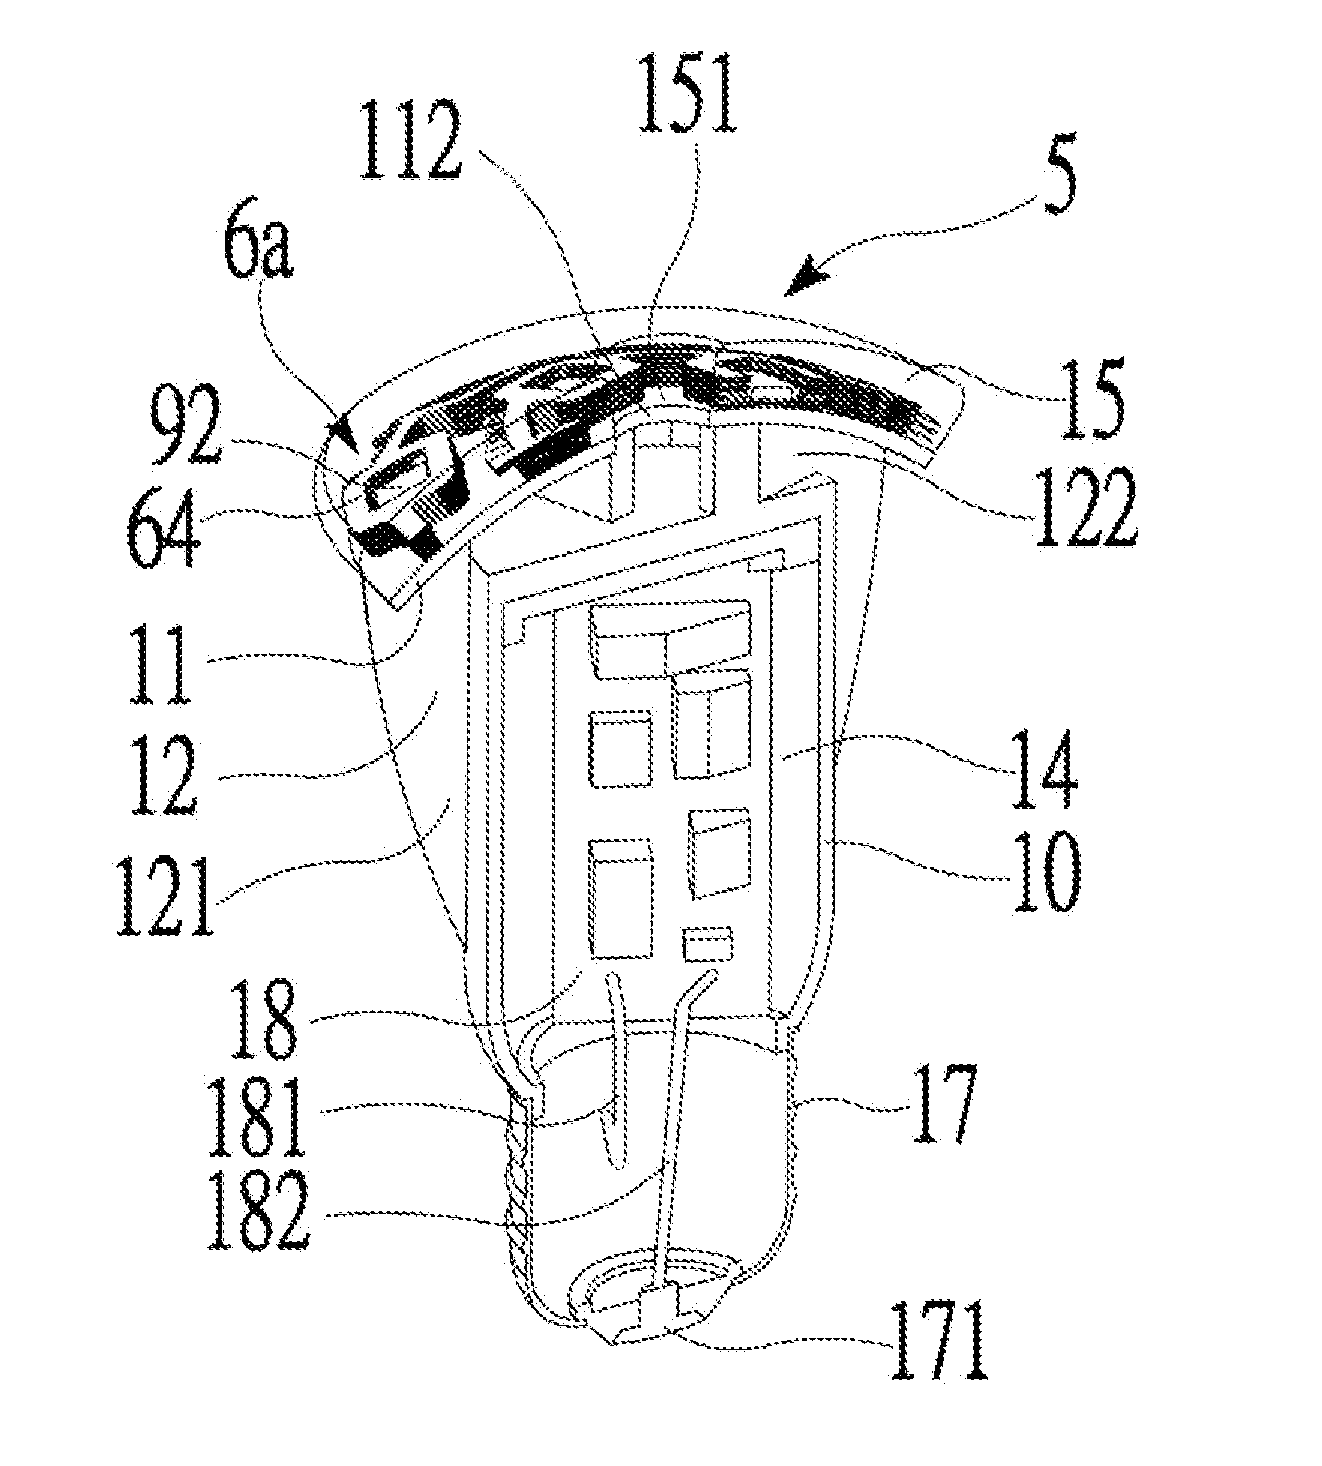 LED 3D curved lead frame of illumination device